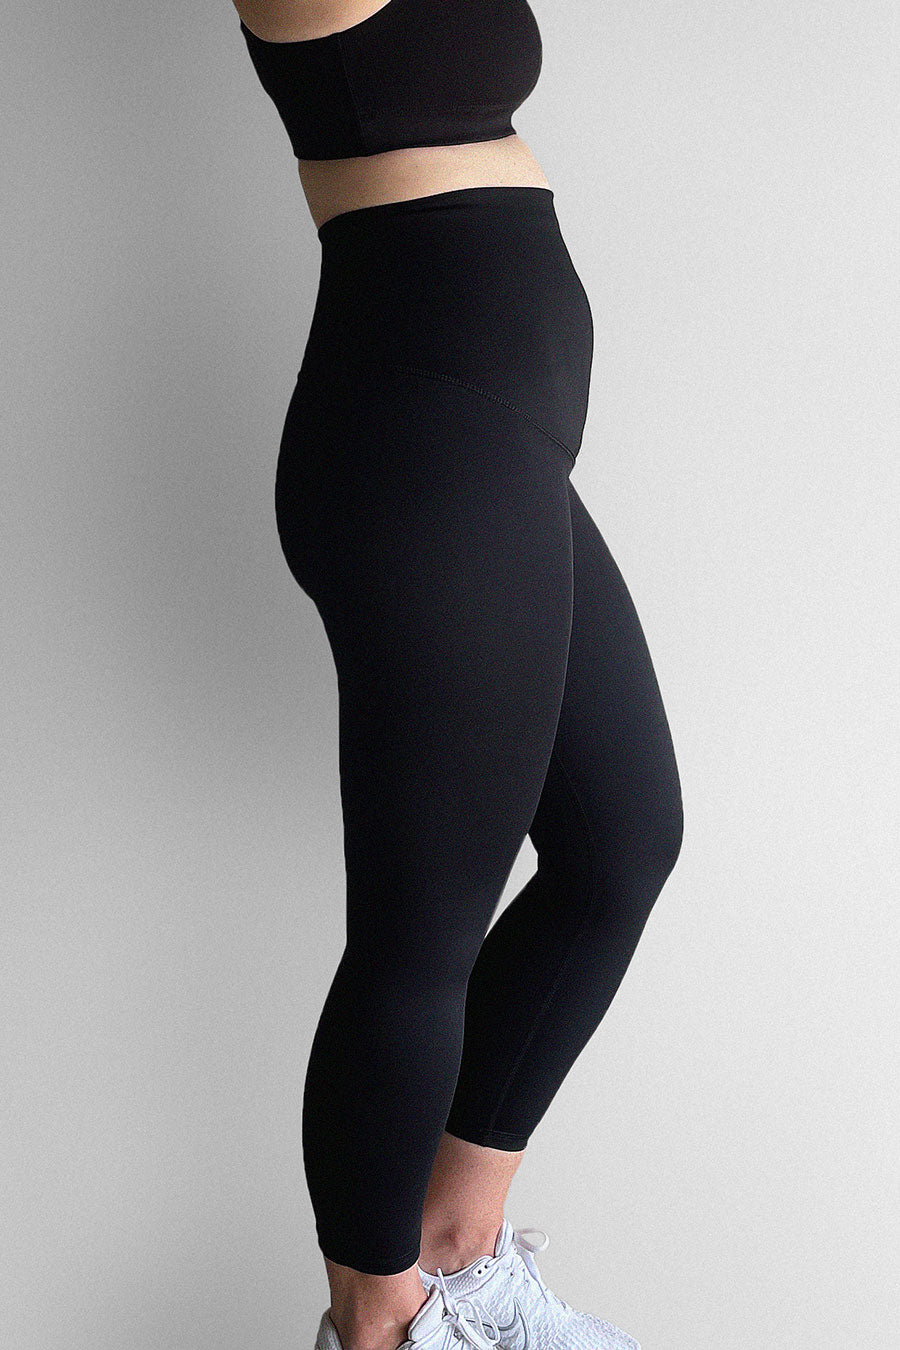 Endometriosis Support 7/8 Length Tight - Black from Active Truth™
